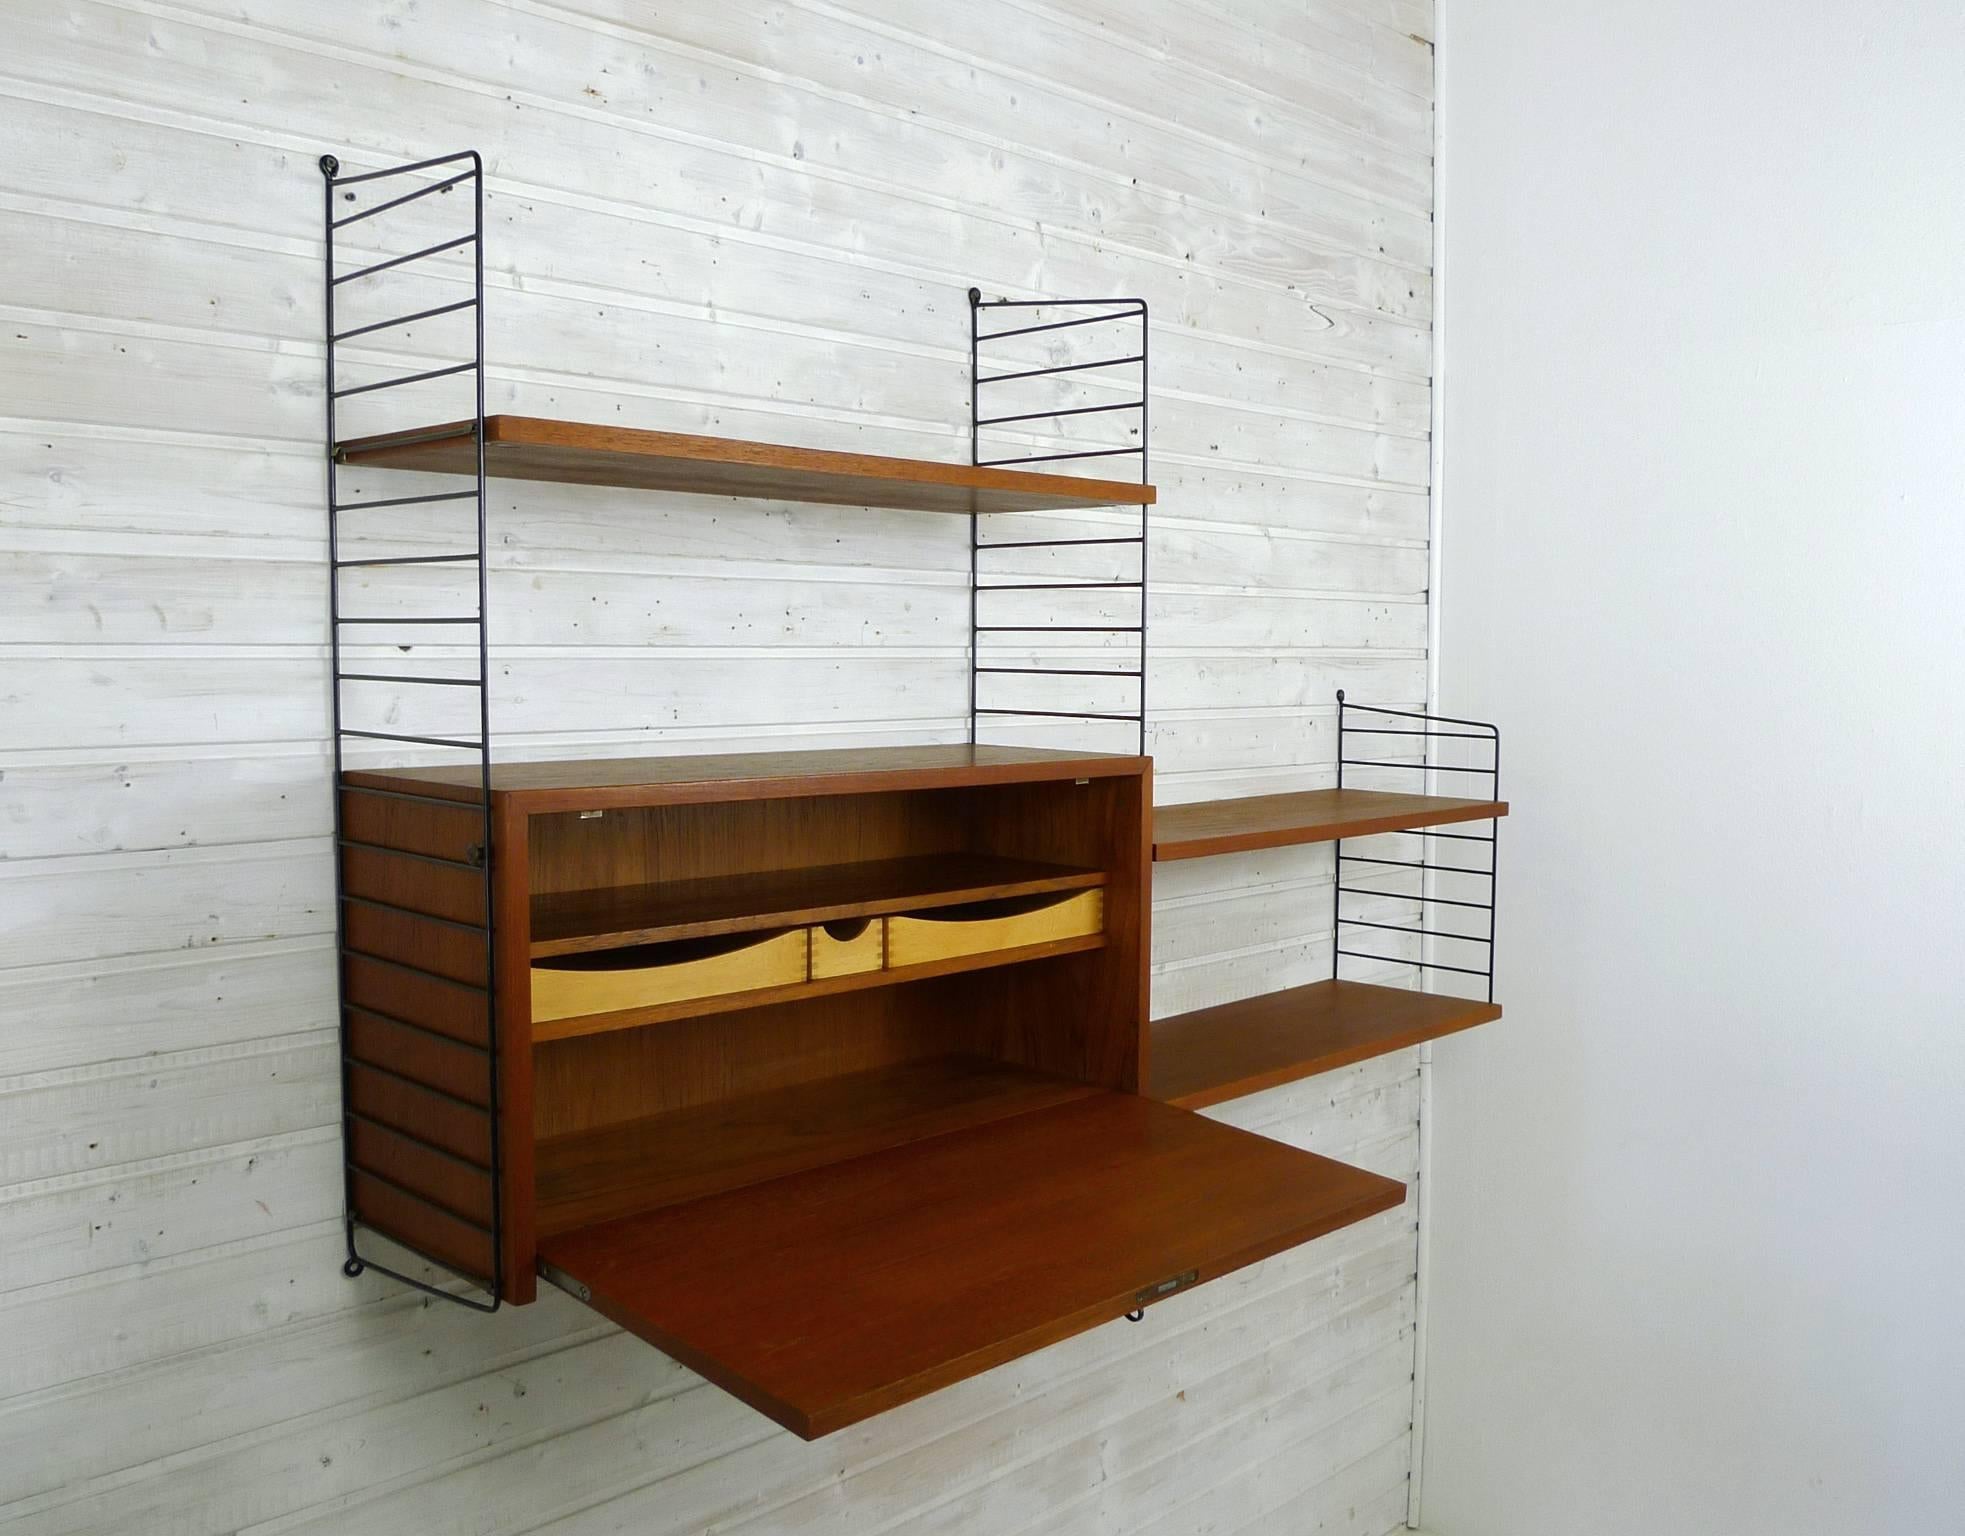 20th Century Swedish Wall Unit with Teak Box and Shelves by Nisse Strinning for String, 1950s For Sale